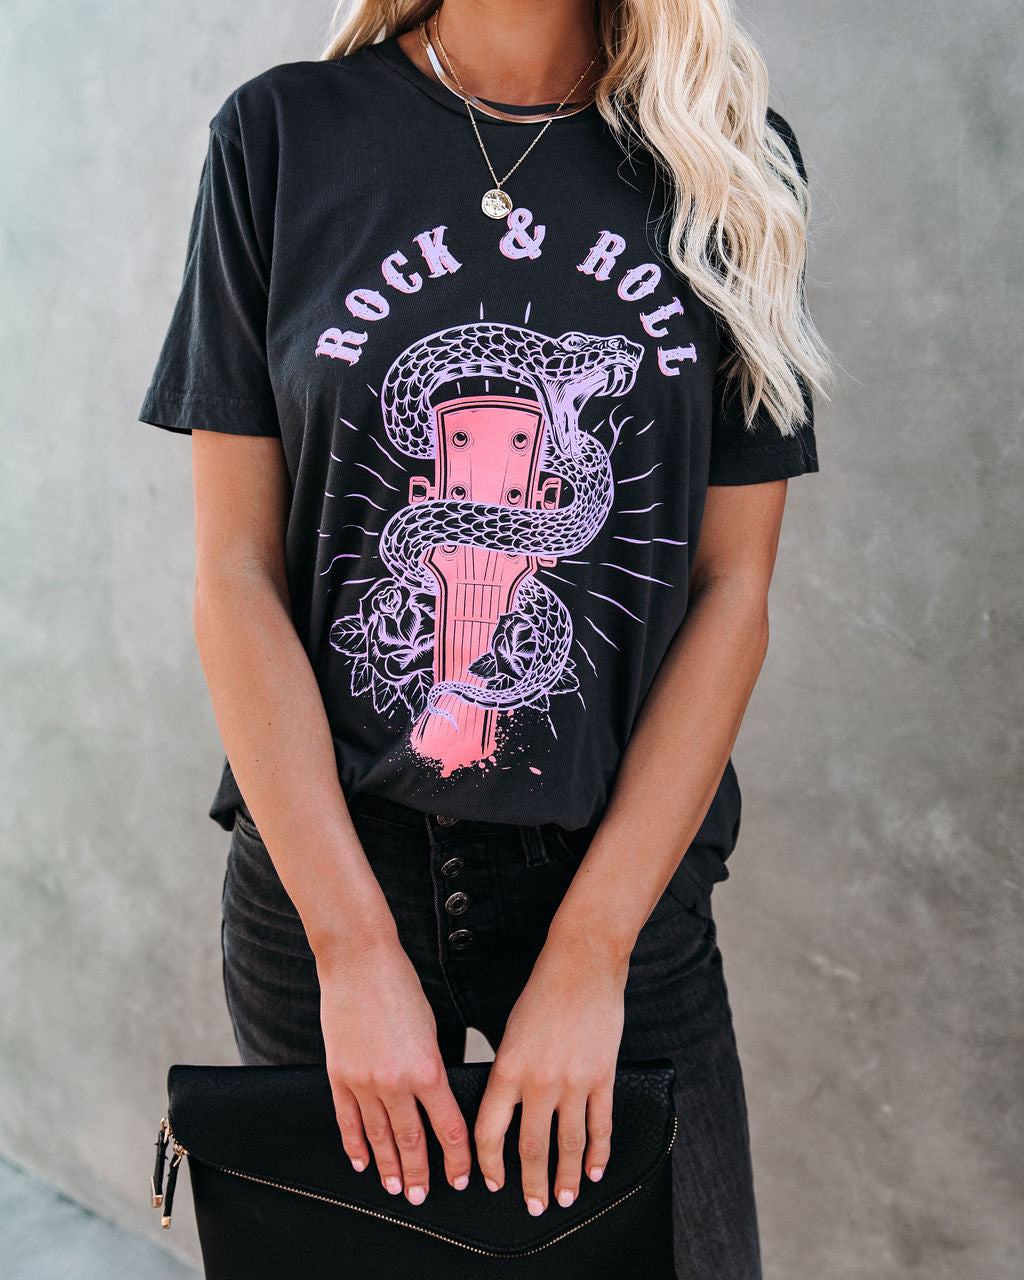 In Tune Rock & Roll Cotton Tee